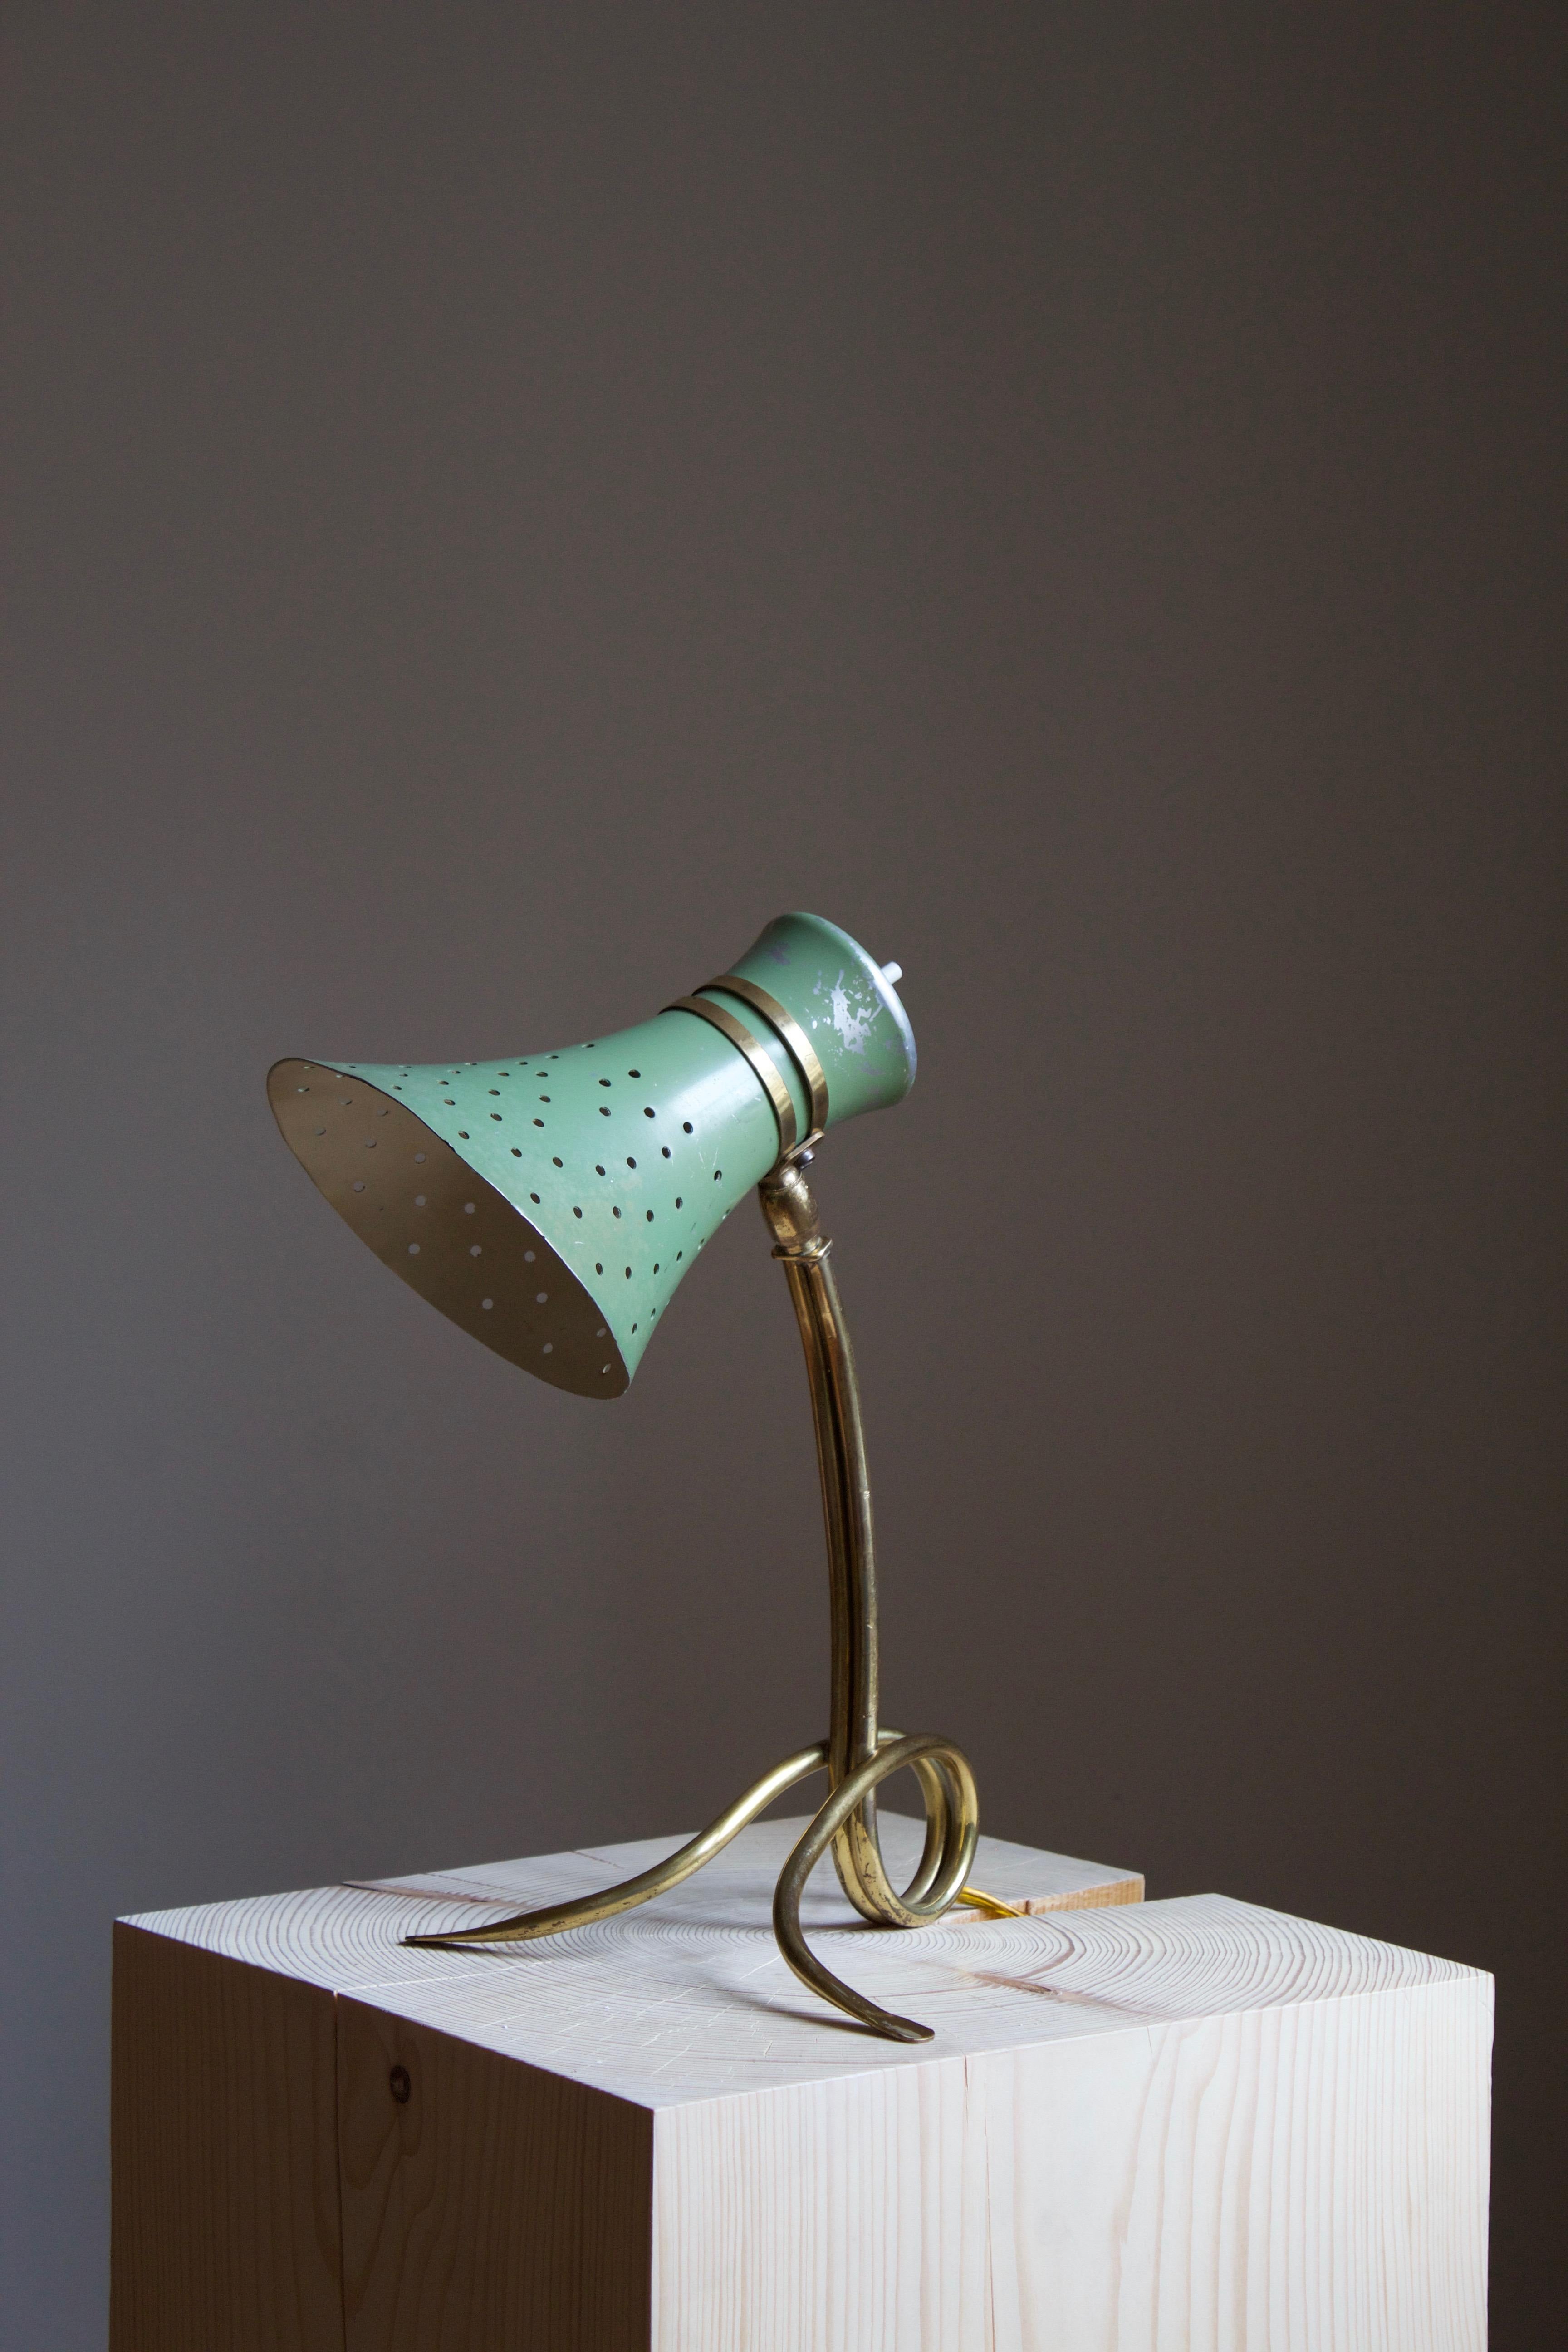 A highly modernist table lamp / desk light. Designed by an unknown Italian designer. Produced in Italy, 1950s. Features a sculpted brass base, perforated green / torquise lacquered metal screen. 

Other Italian lighting designers of the period